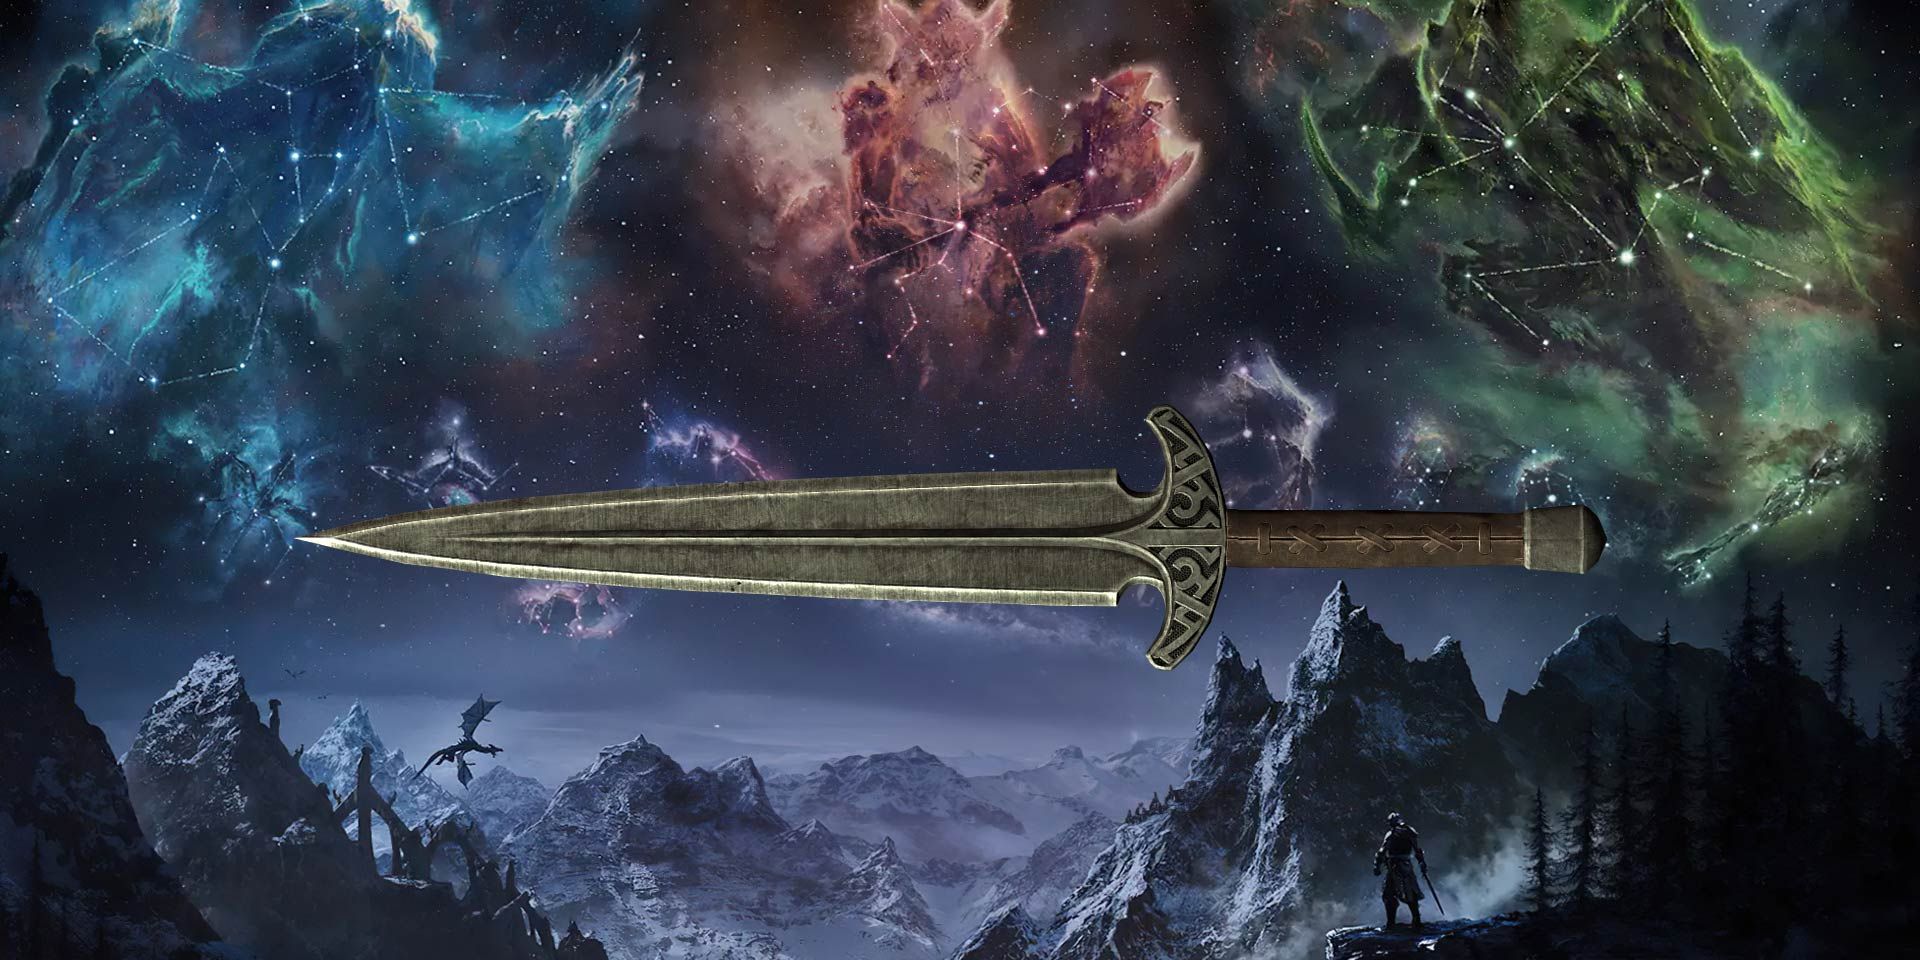 Valdrs Lucky Dagger among mountains and Elder Scrolls star signs.